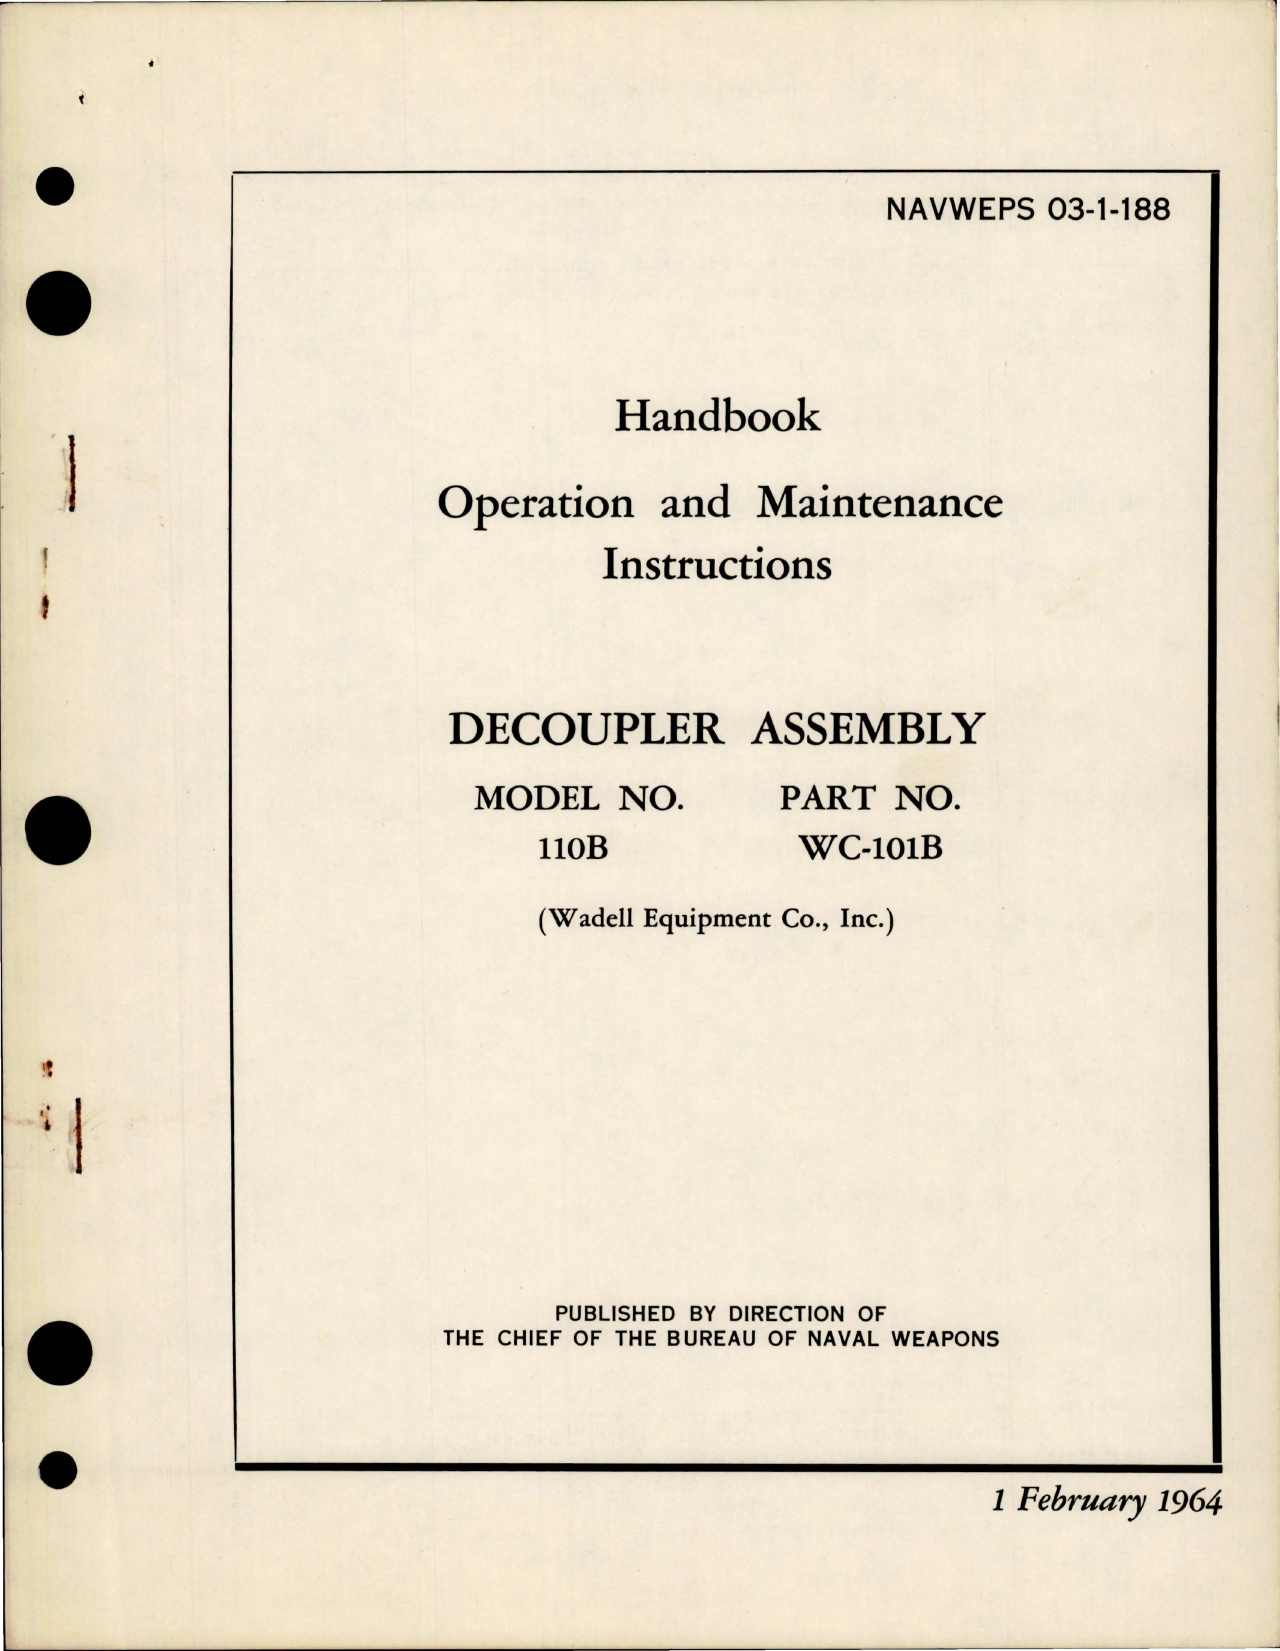 Sample page 1 from AirCorps Library document: Operation and Maintenance Instructions for Decoupler Assembly - Model 110B - Part WC-101B 